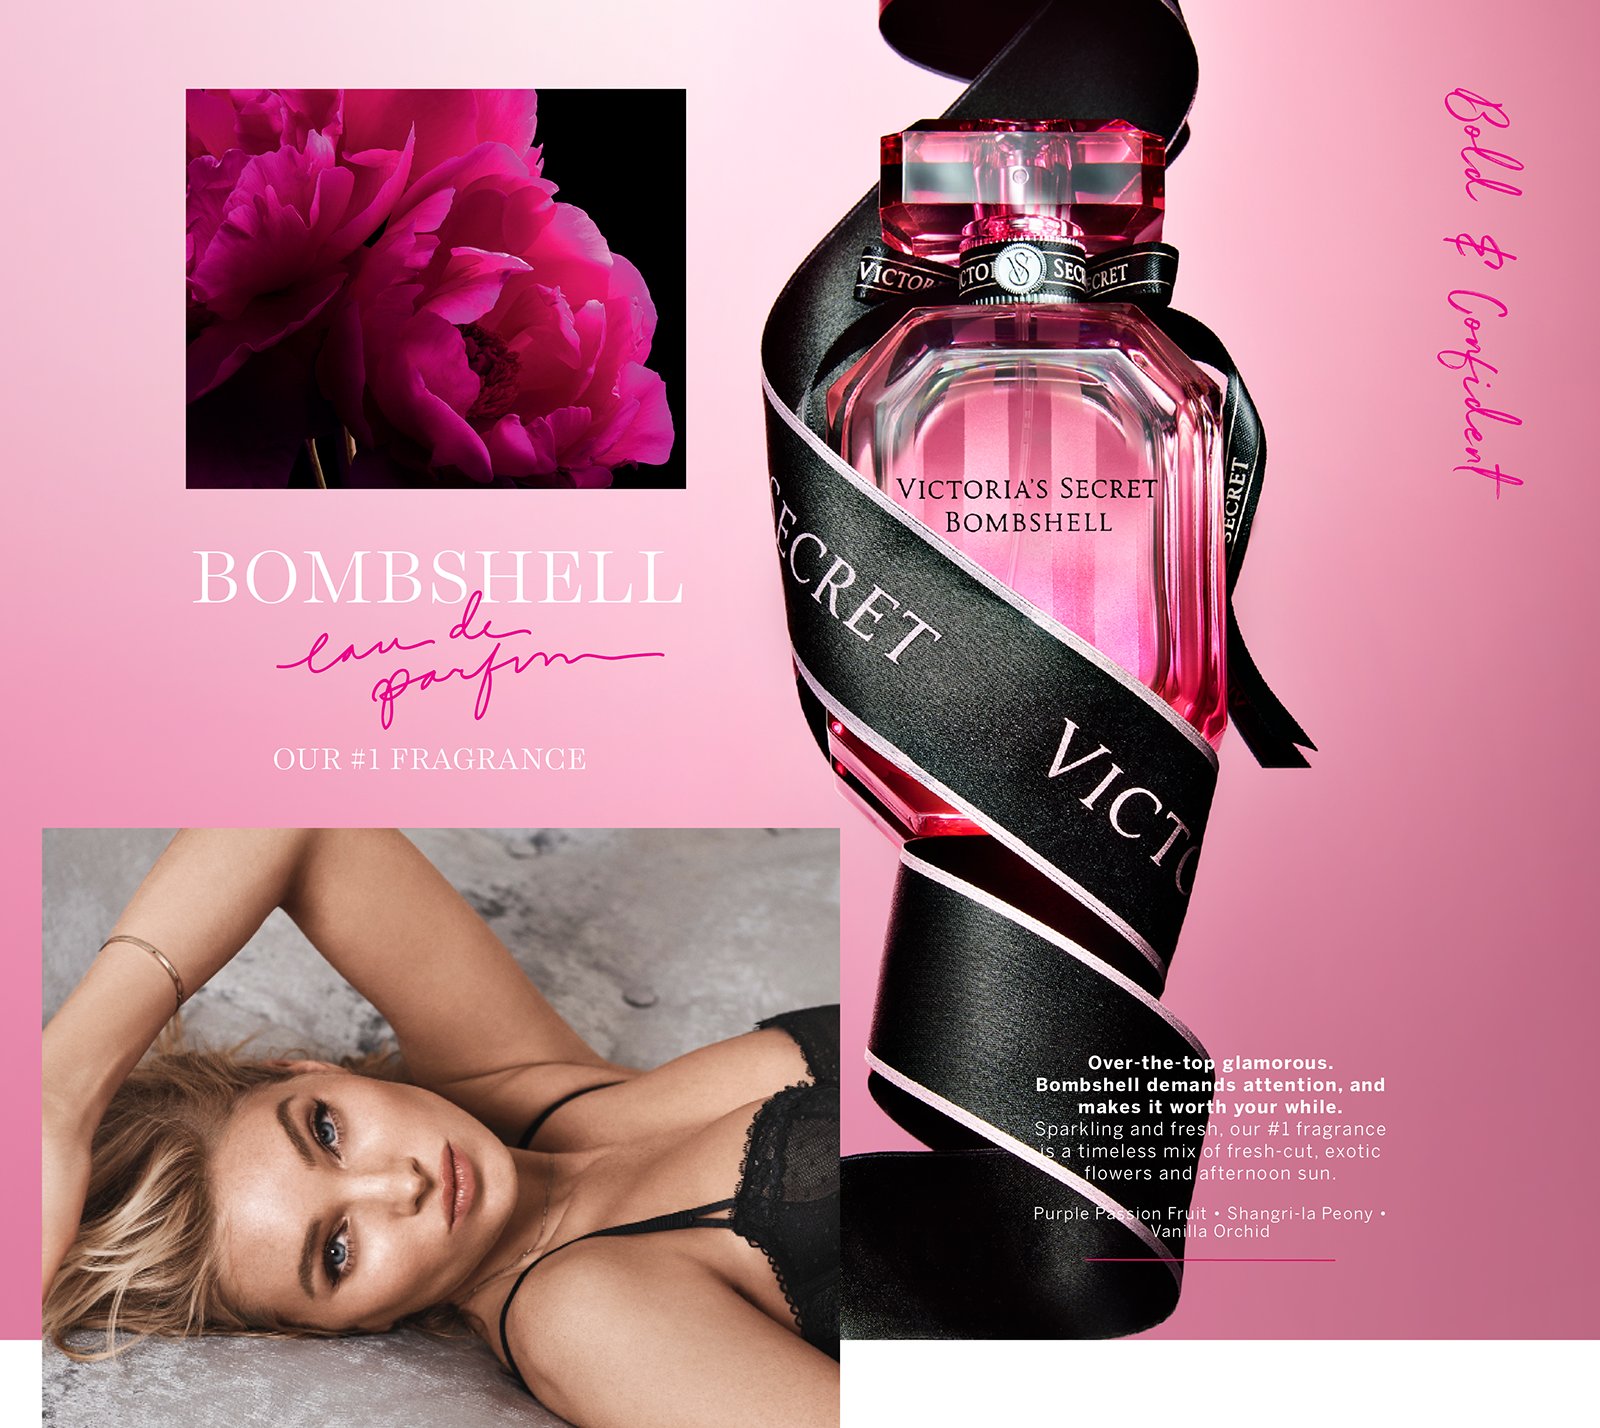 Bold and Confident. Bombshell Eau de Parfum. Our number 1 fragrance. Over-the-top glamorous. Bombshell demands attention, and makes it worth your while. Sparkling and fresh, our #1 fragrance is a timeless mix of fresh-cut, exotic flowers and afternoon sun. Purple Passion Fruit, Shangri-La Peony, Vanilla Orchid.